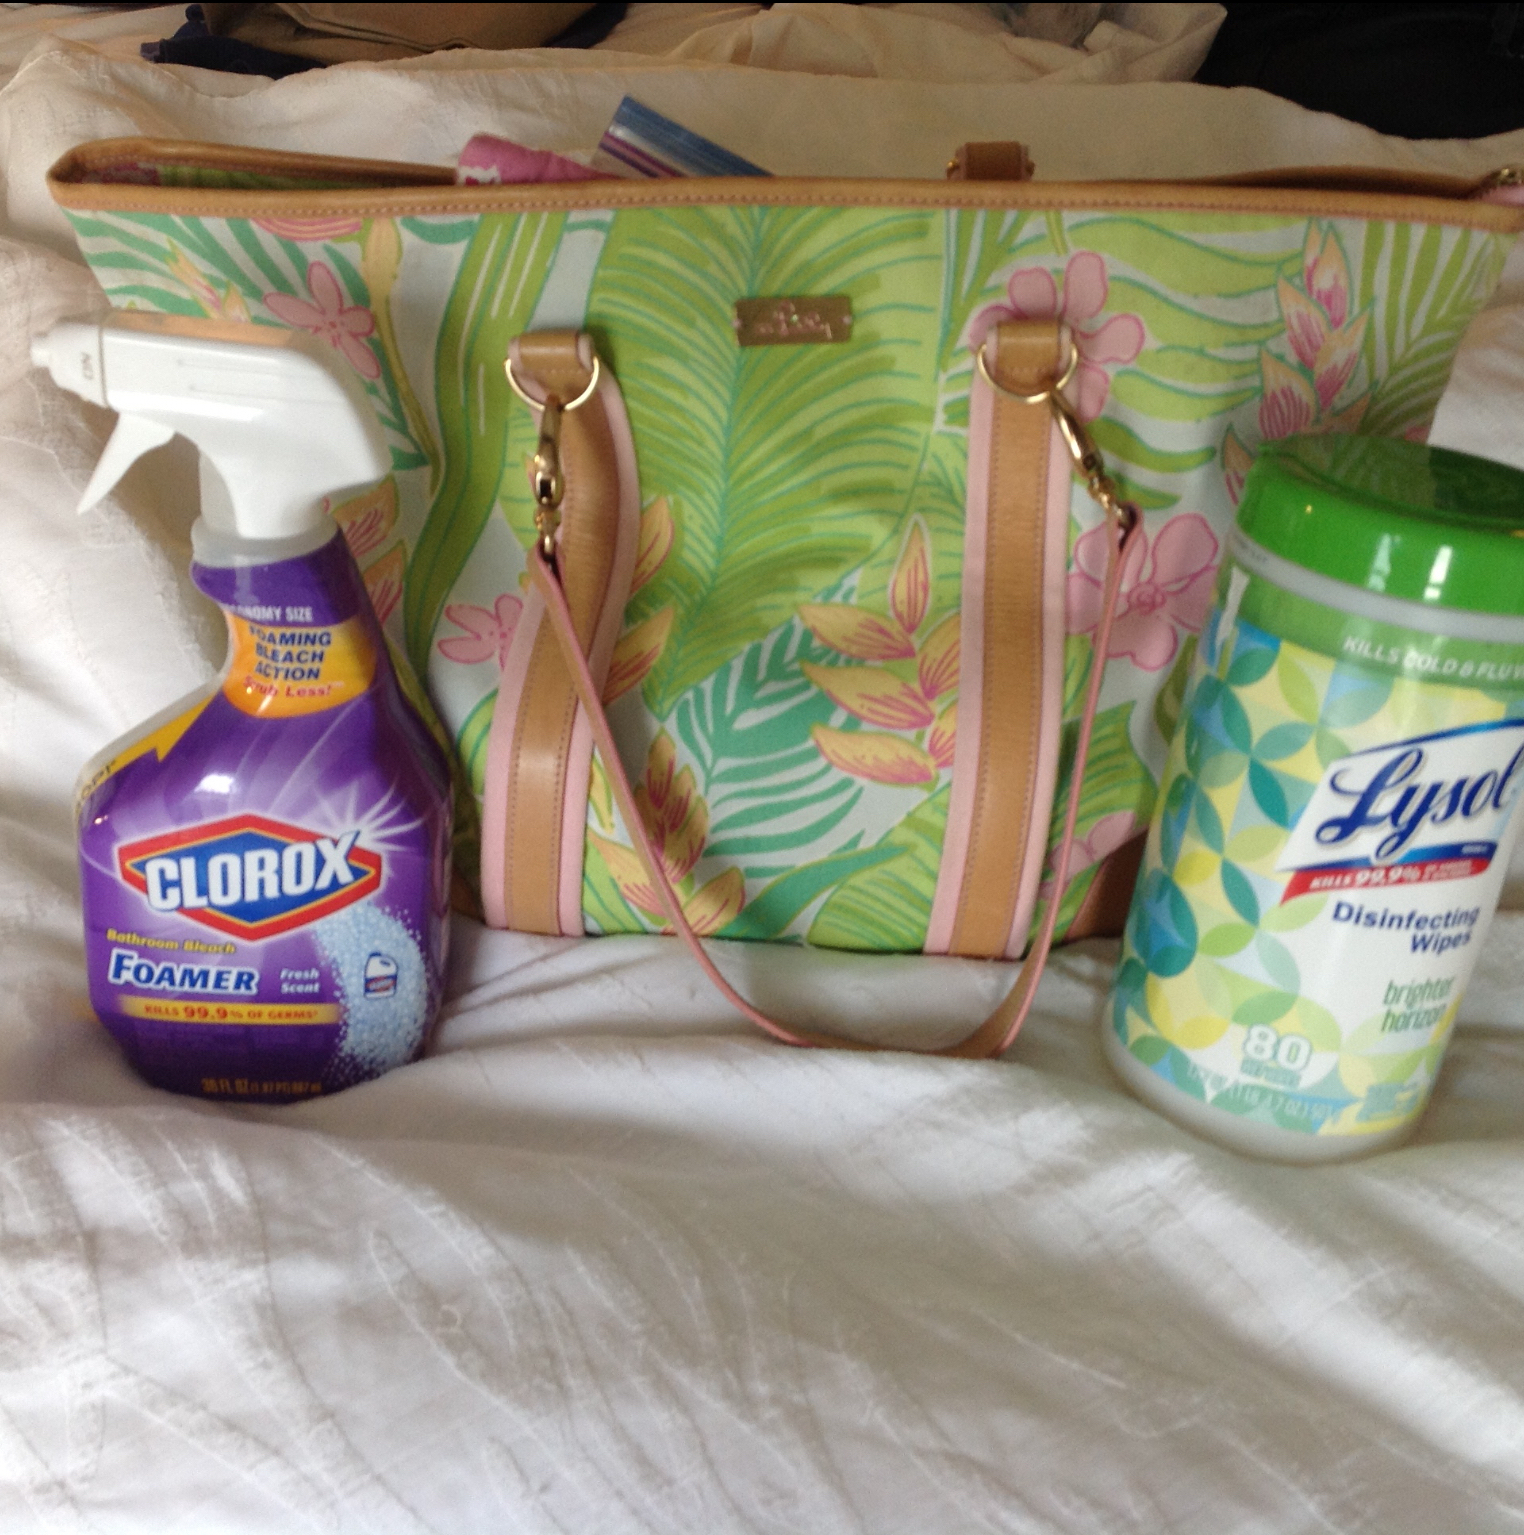 When Mary Baker left in March, she traveled with these essentials. She's expecting a similar journey when she returns.